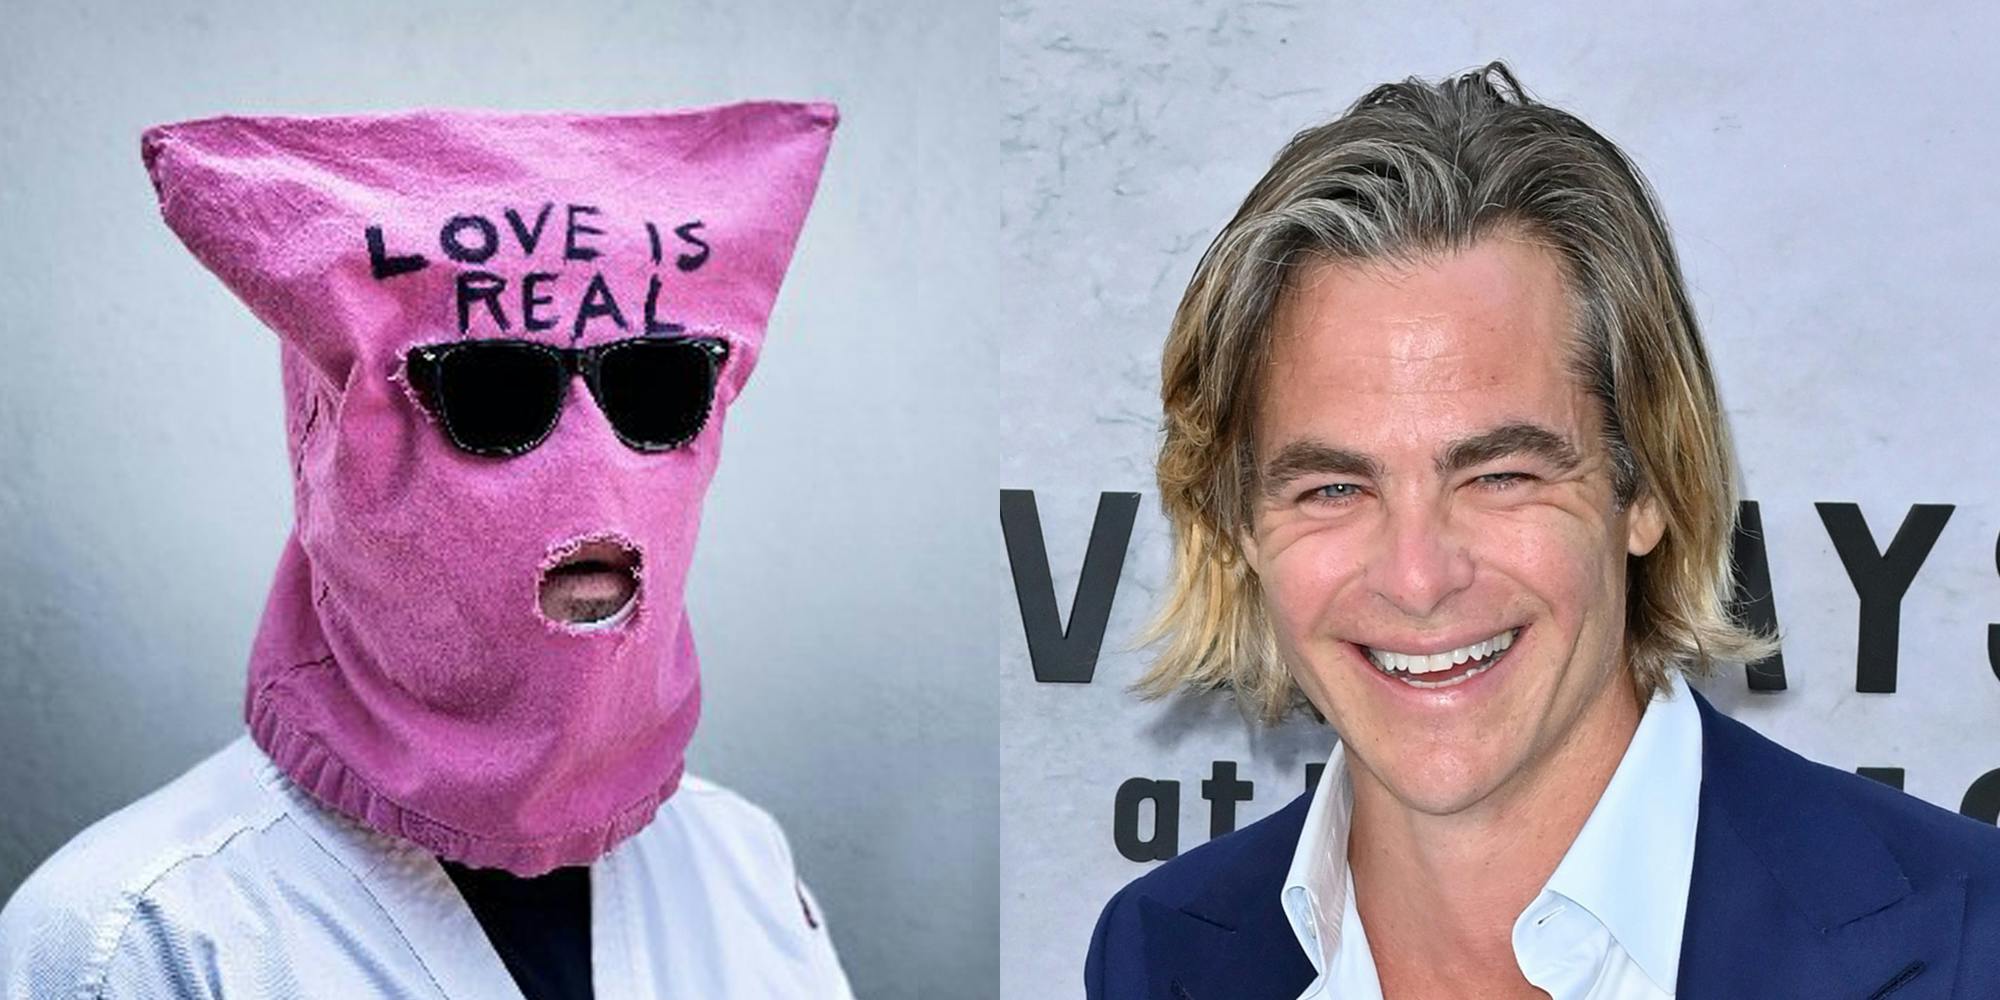 Chuck Tingle Profile Image Man with pink bag on his head saying 'Love is real' against gray background (L) Chris Pine smiling in front of gray background (R)